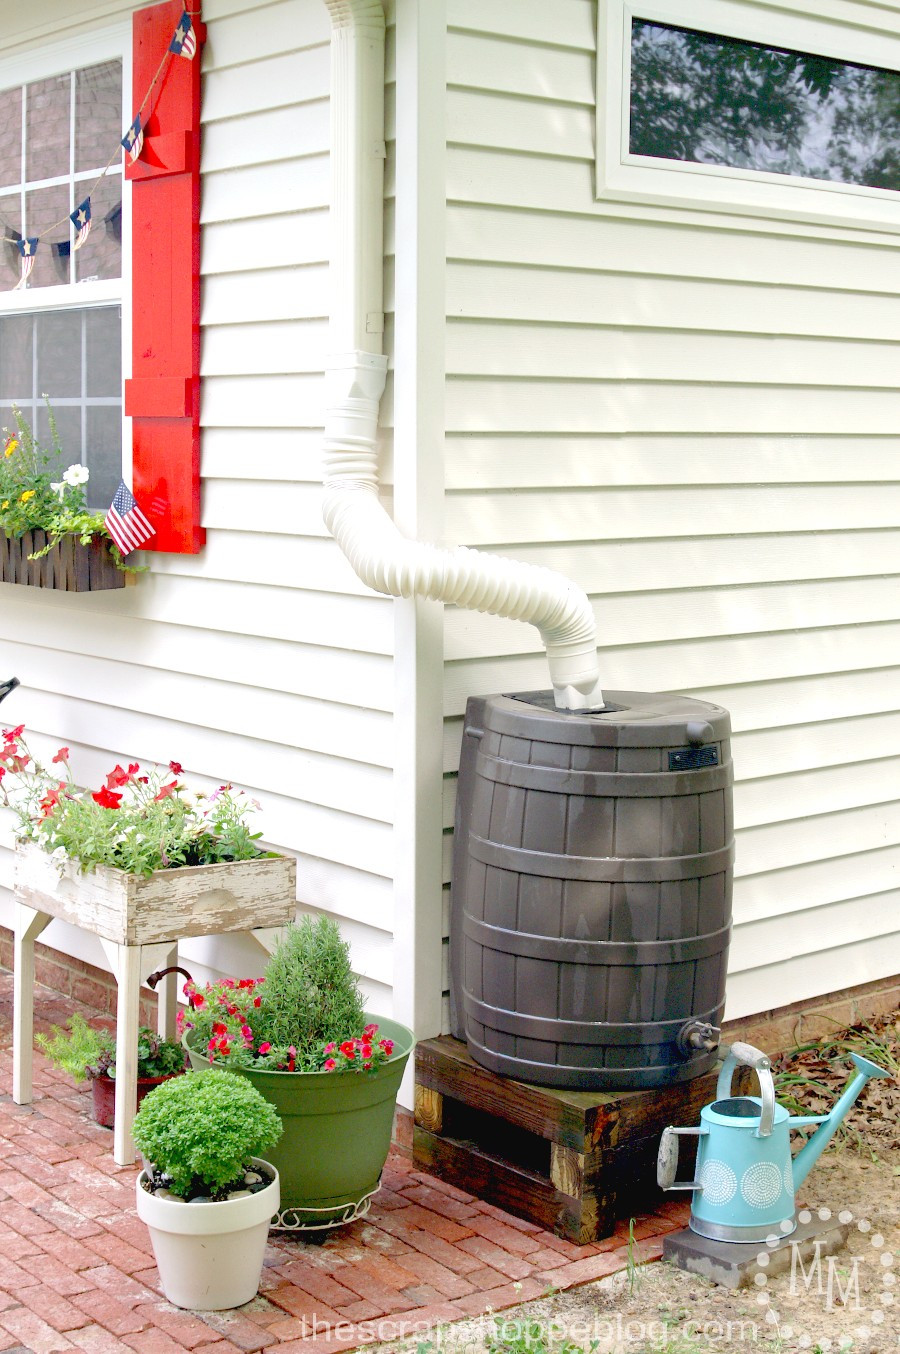 Best ideas about DIY Rain Barrel
. Save or Pin How to Install a Rain Barrel The Scrap Shoppe Now.